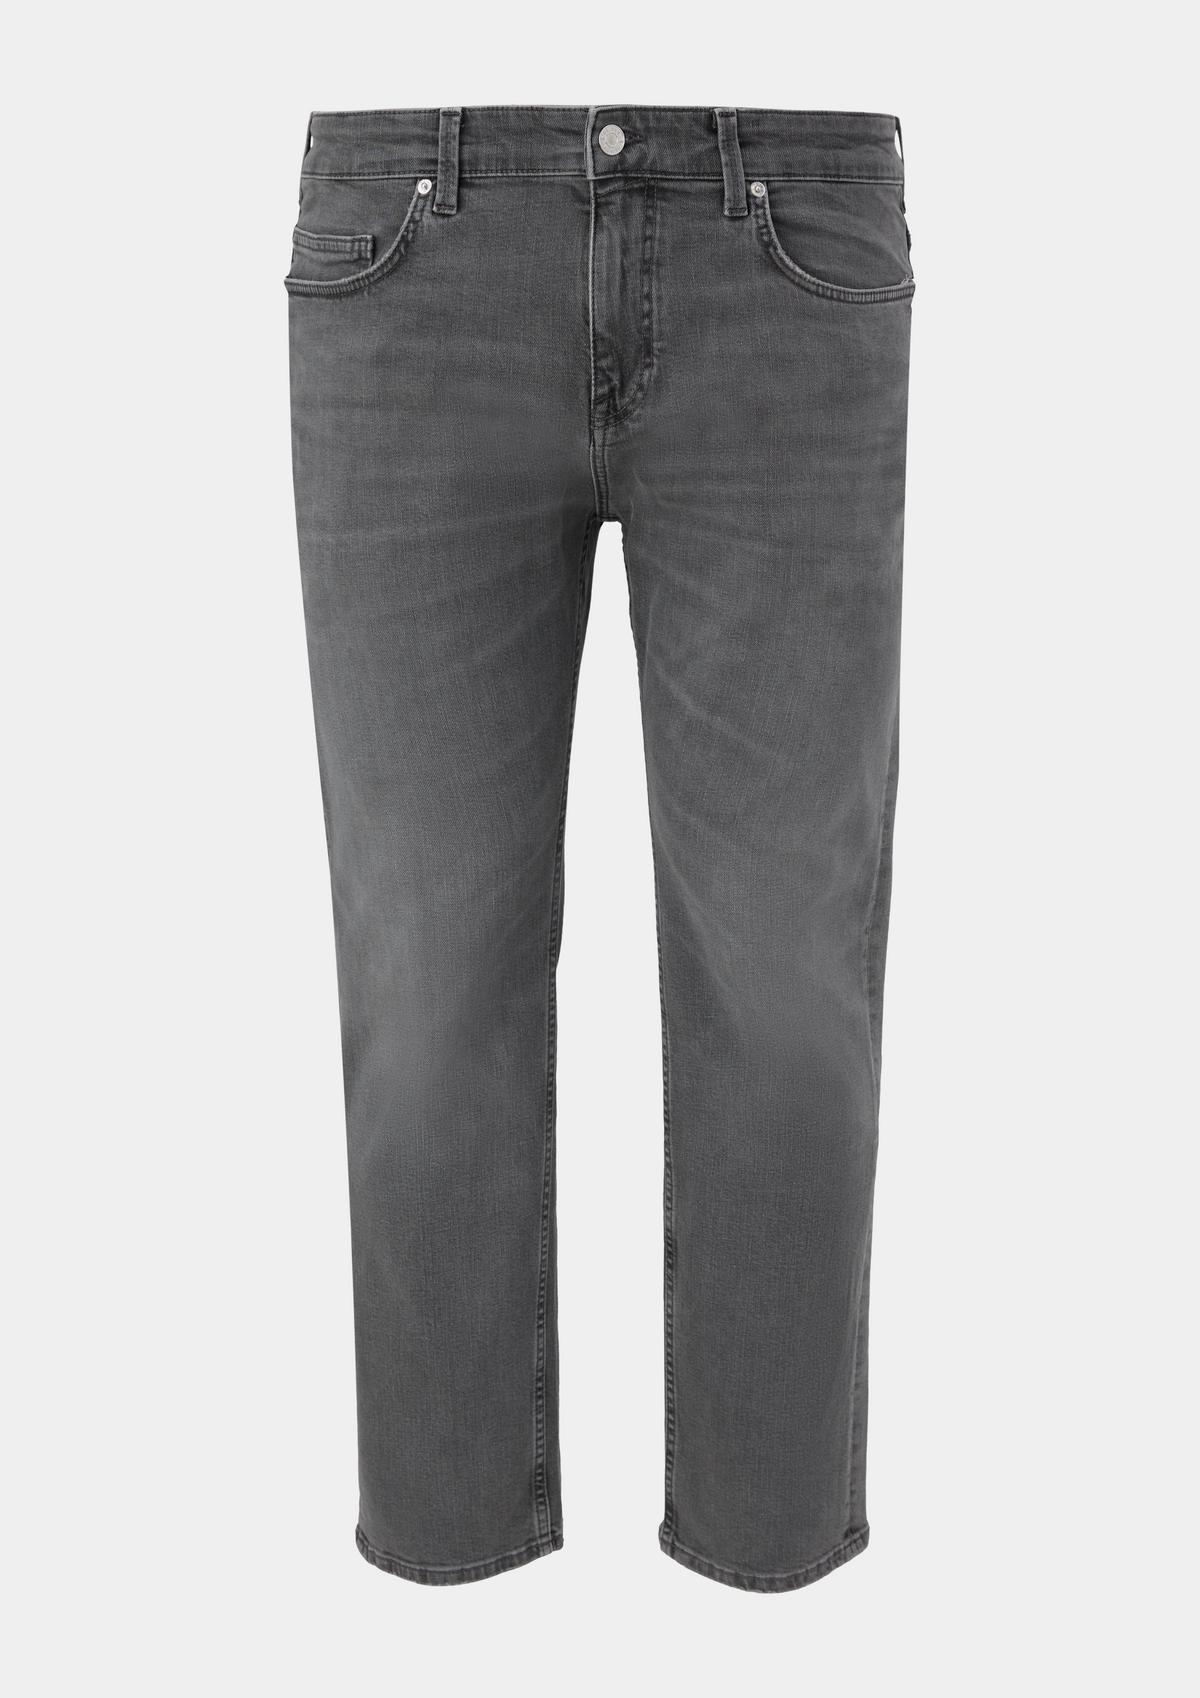 s.Oliver Jeans Casby / Relaxed Fit / Mid Rise / Straight Leg